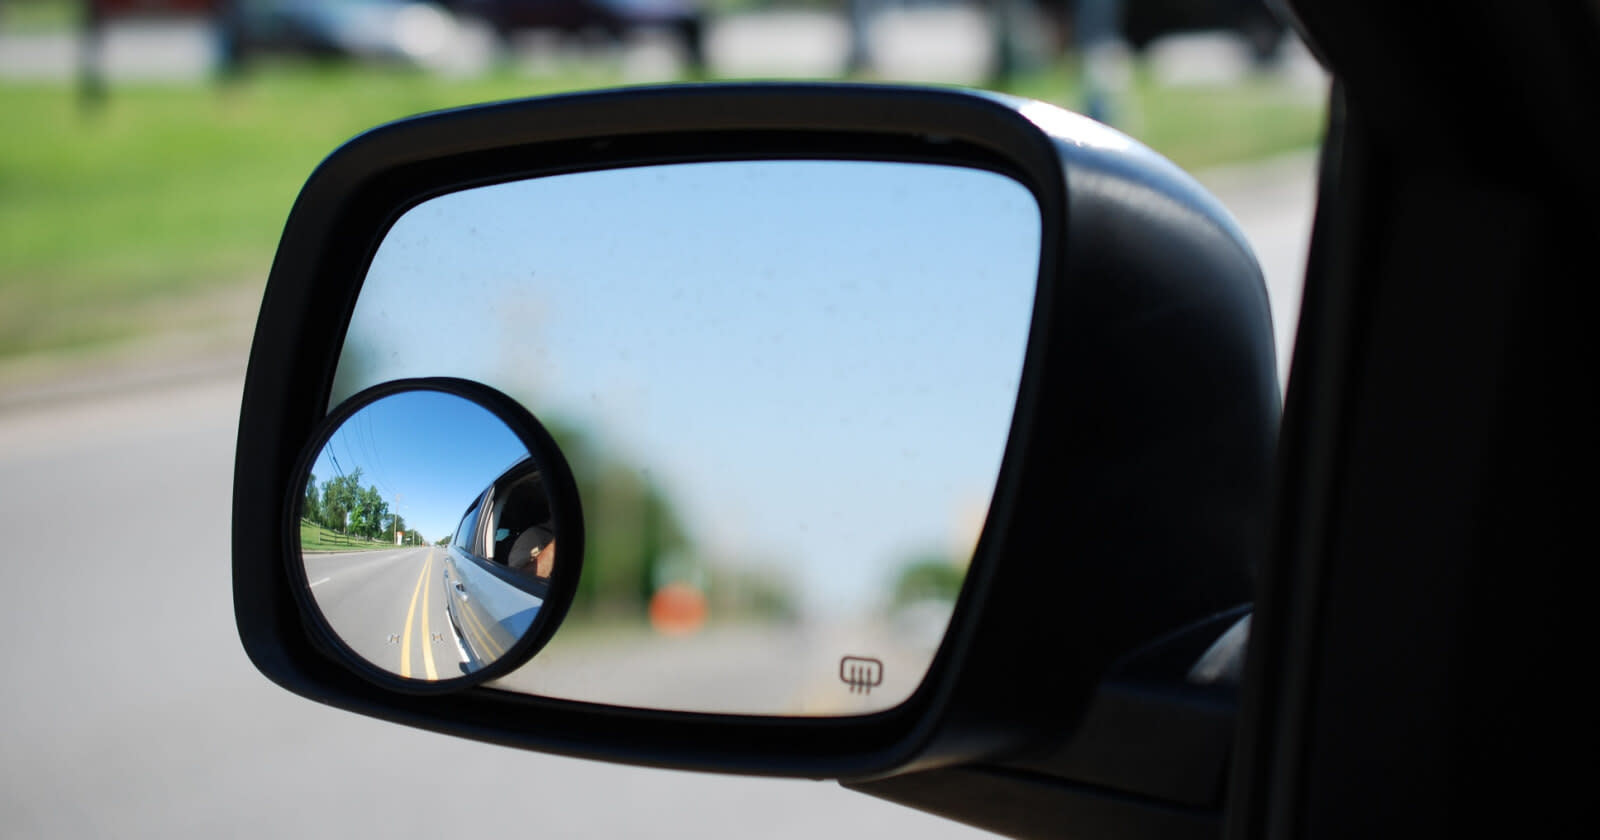 Why do we prefer a convex mirror as a rear-view mirror in vehicles?